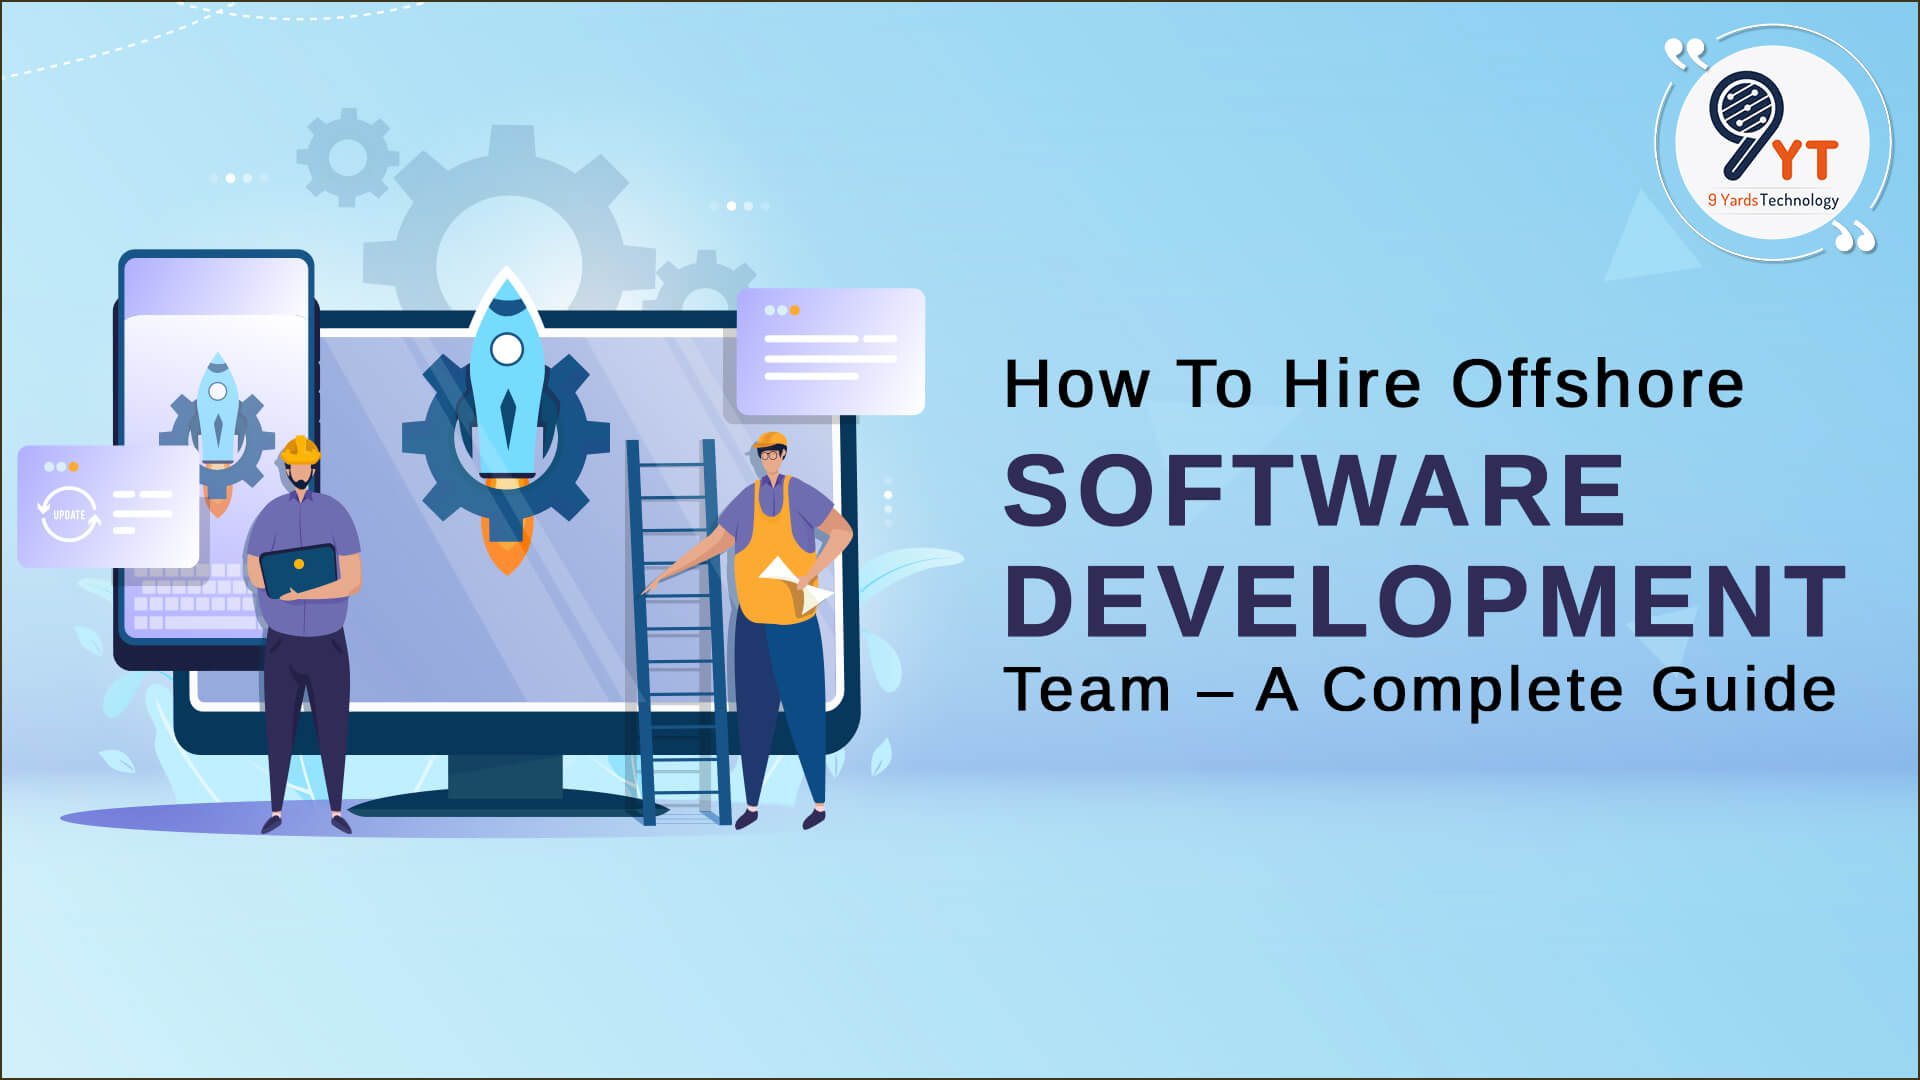 How To Hire Offshore Software Development Team – A Complete Guide